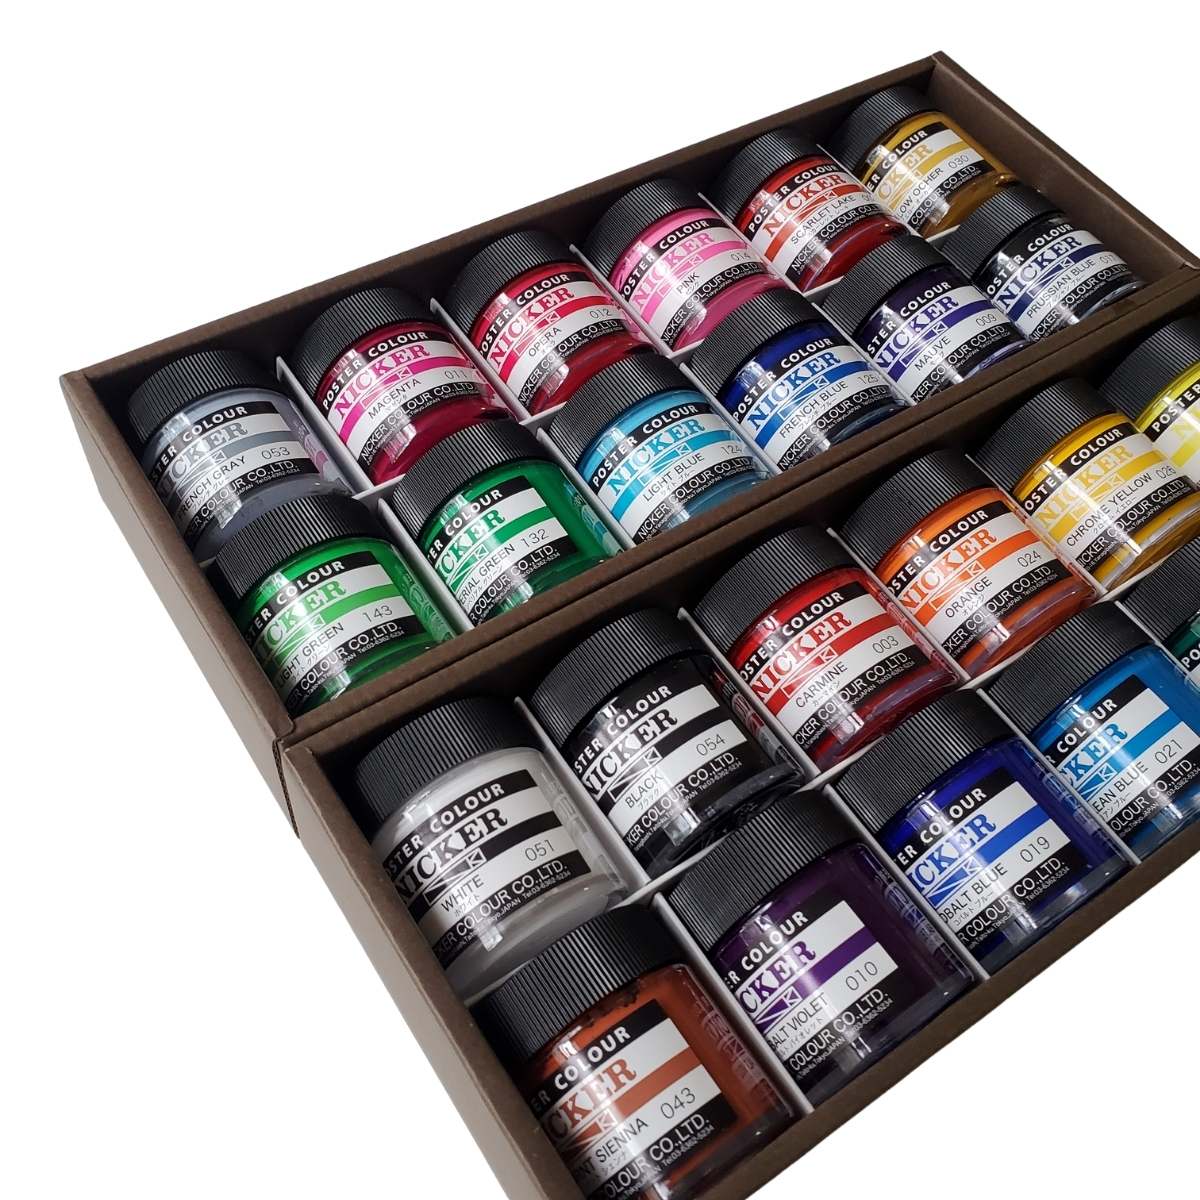 Nicker - Poster Colours - Set of 24 Colours - 40mL Jars - Item